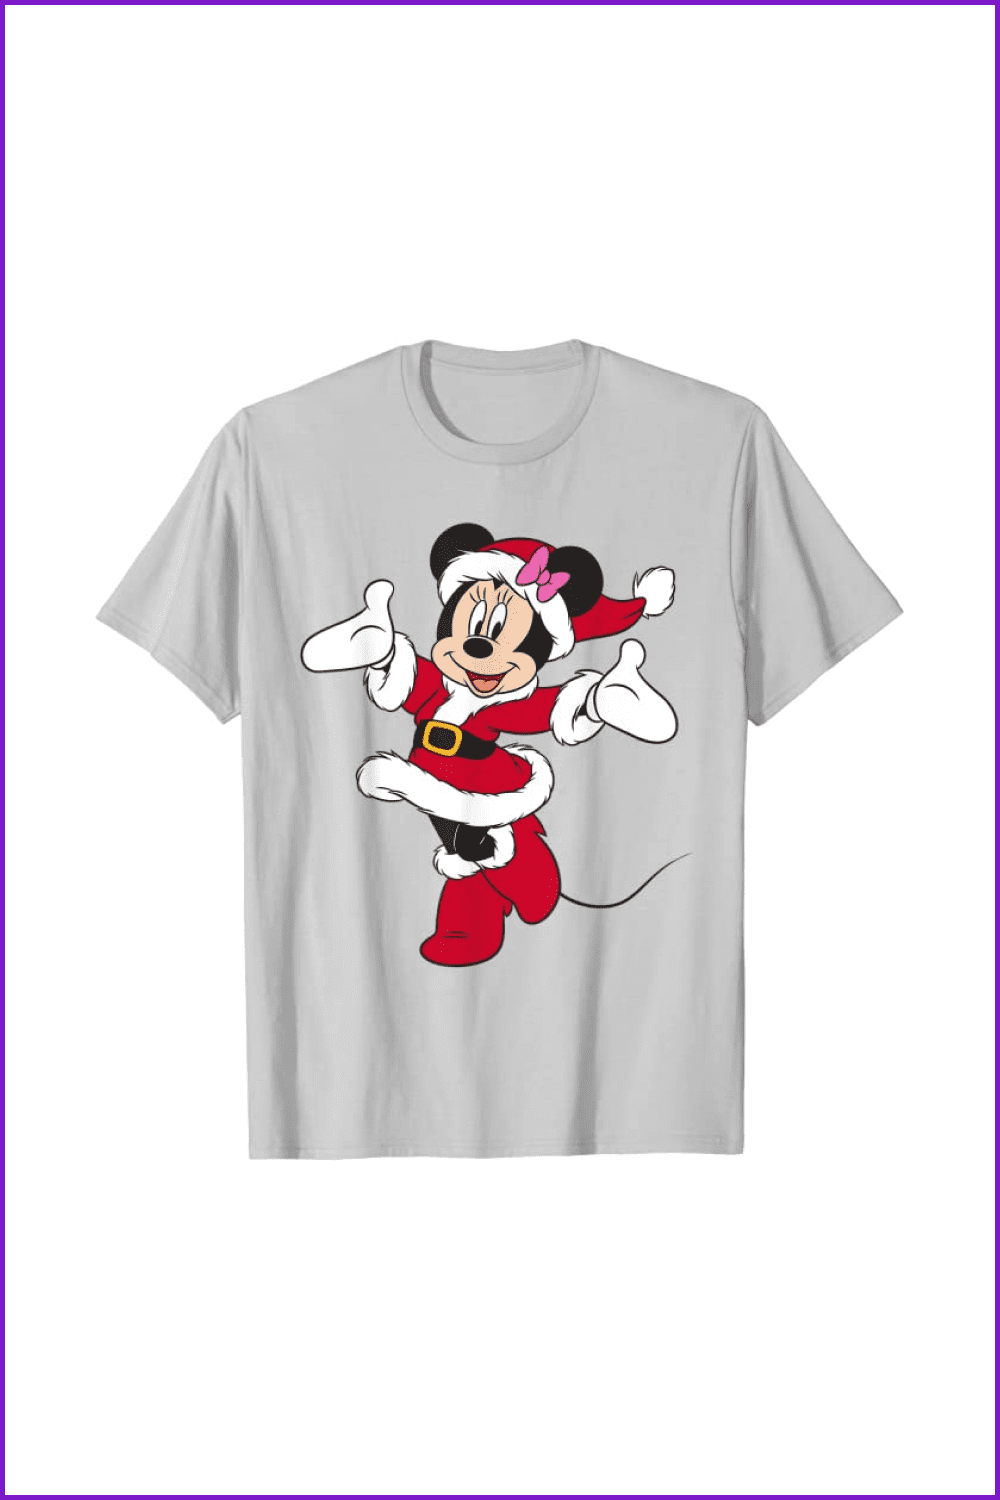 T-shirt with a Minnie Mouse in a Santa Claus costume.